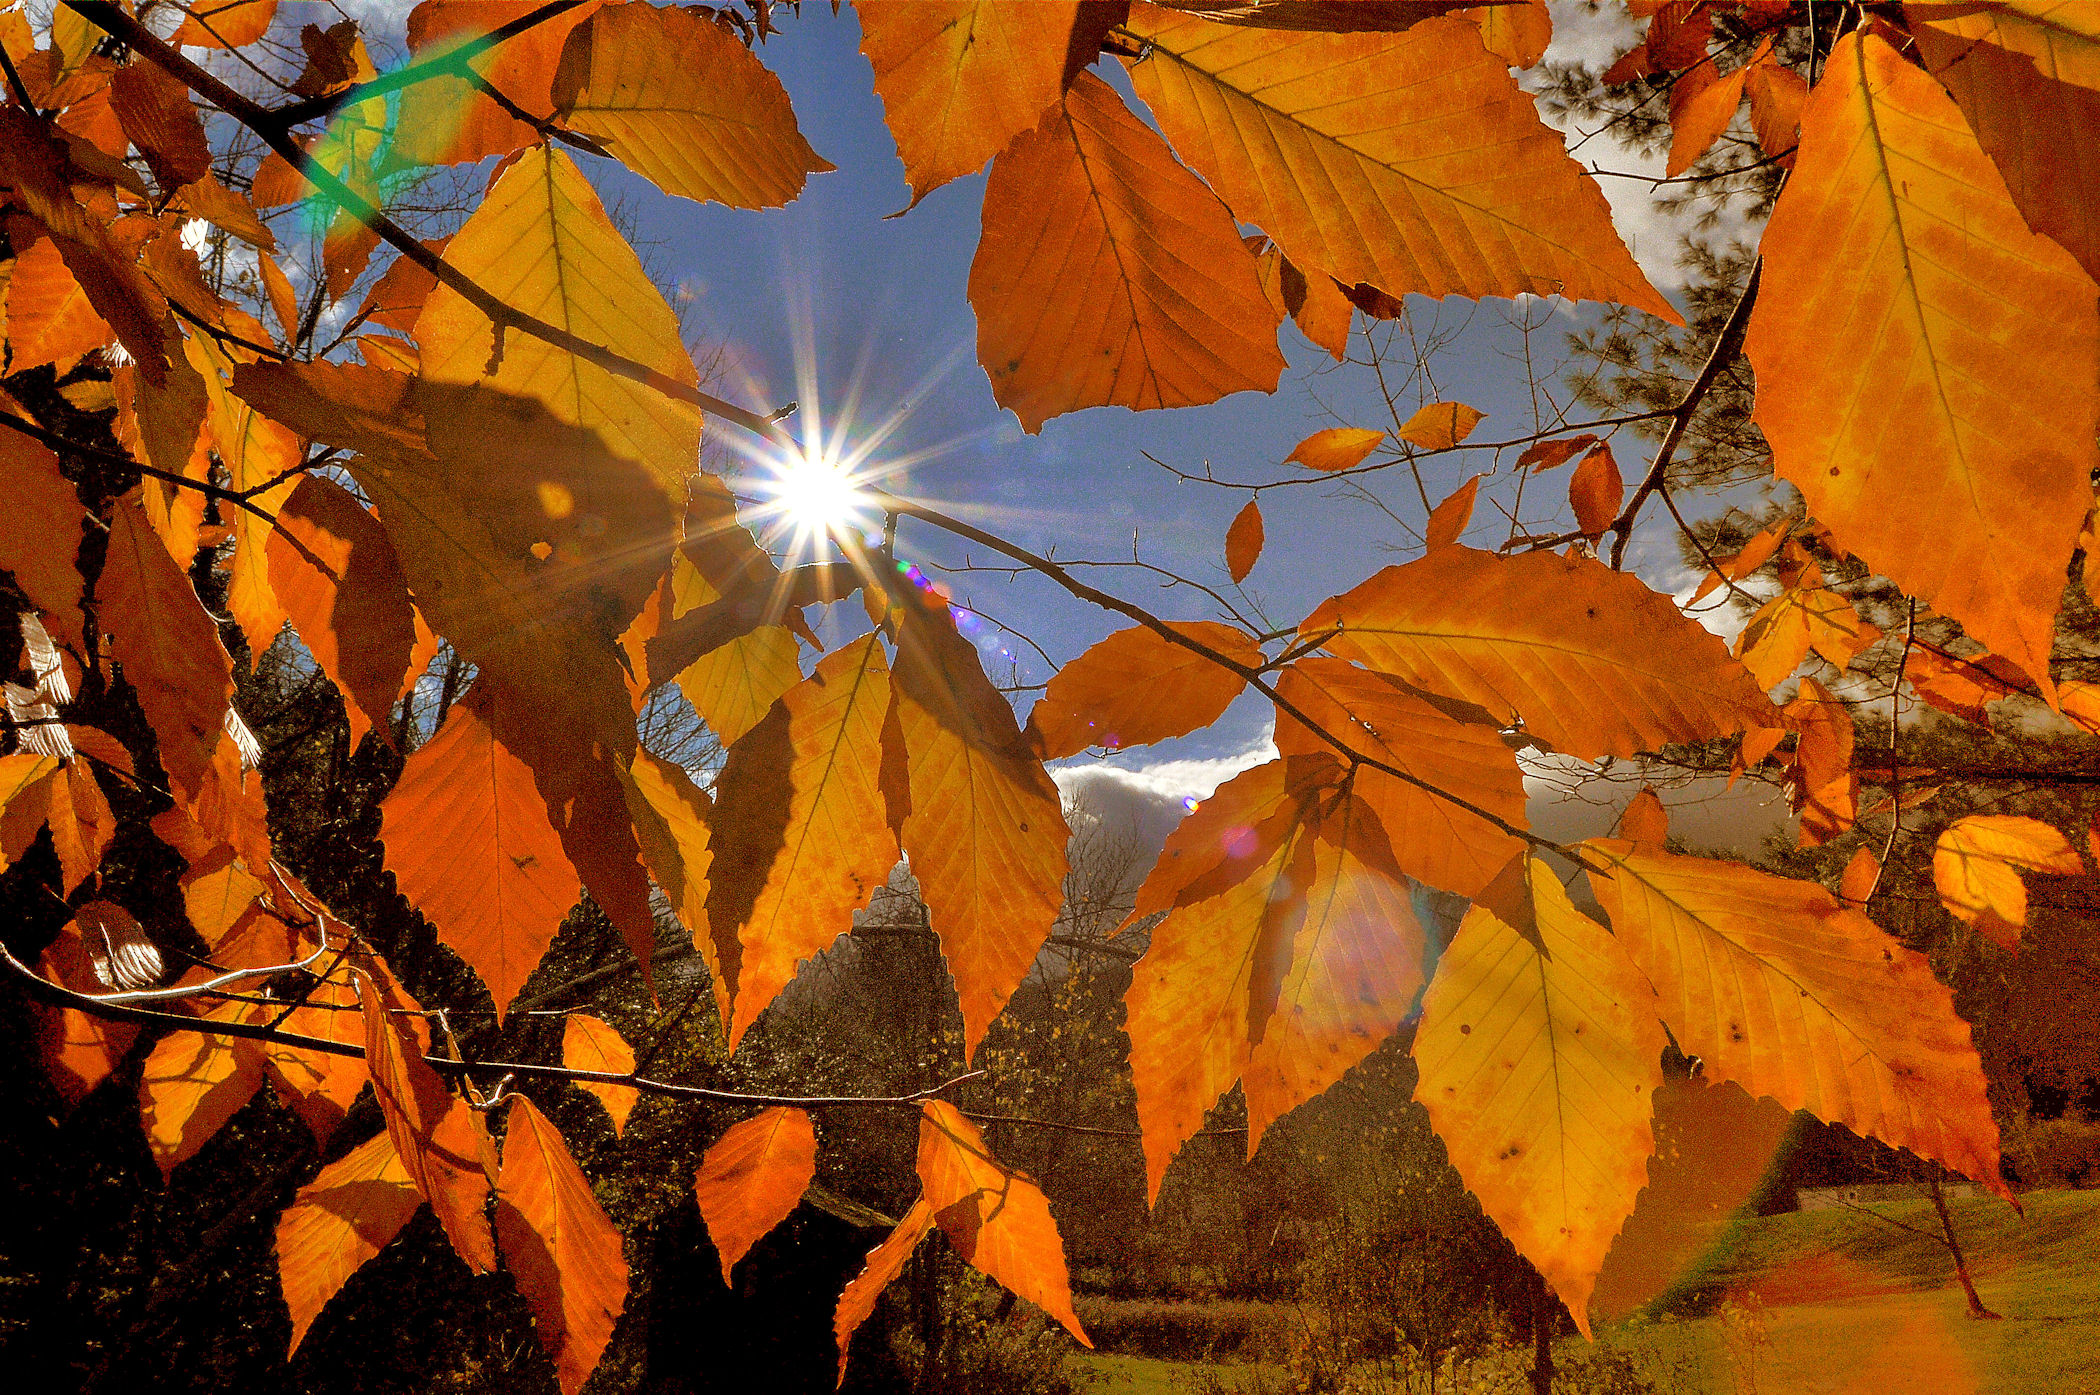 Sunburst And Leaves (user submitted)